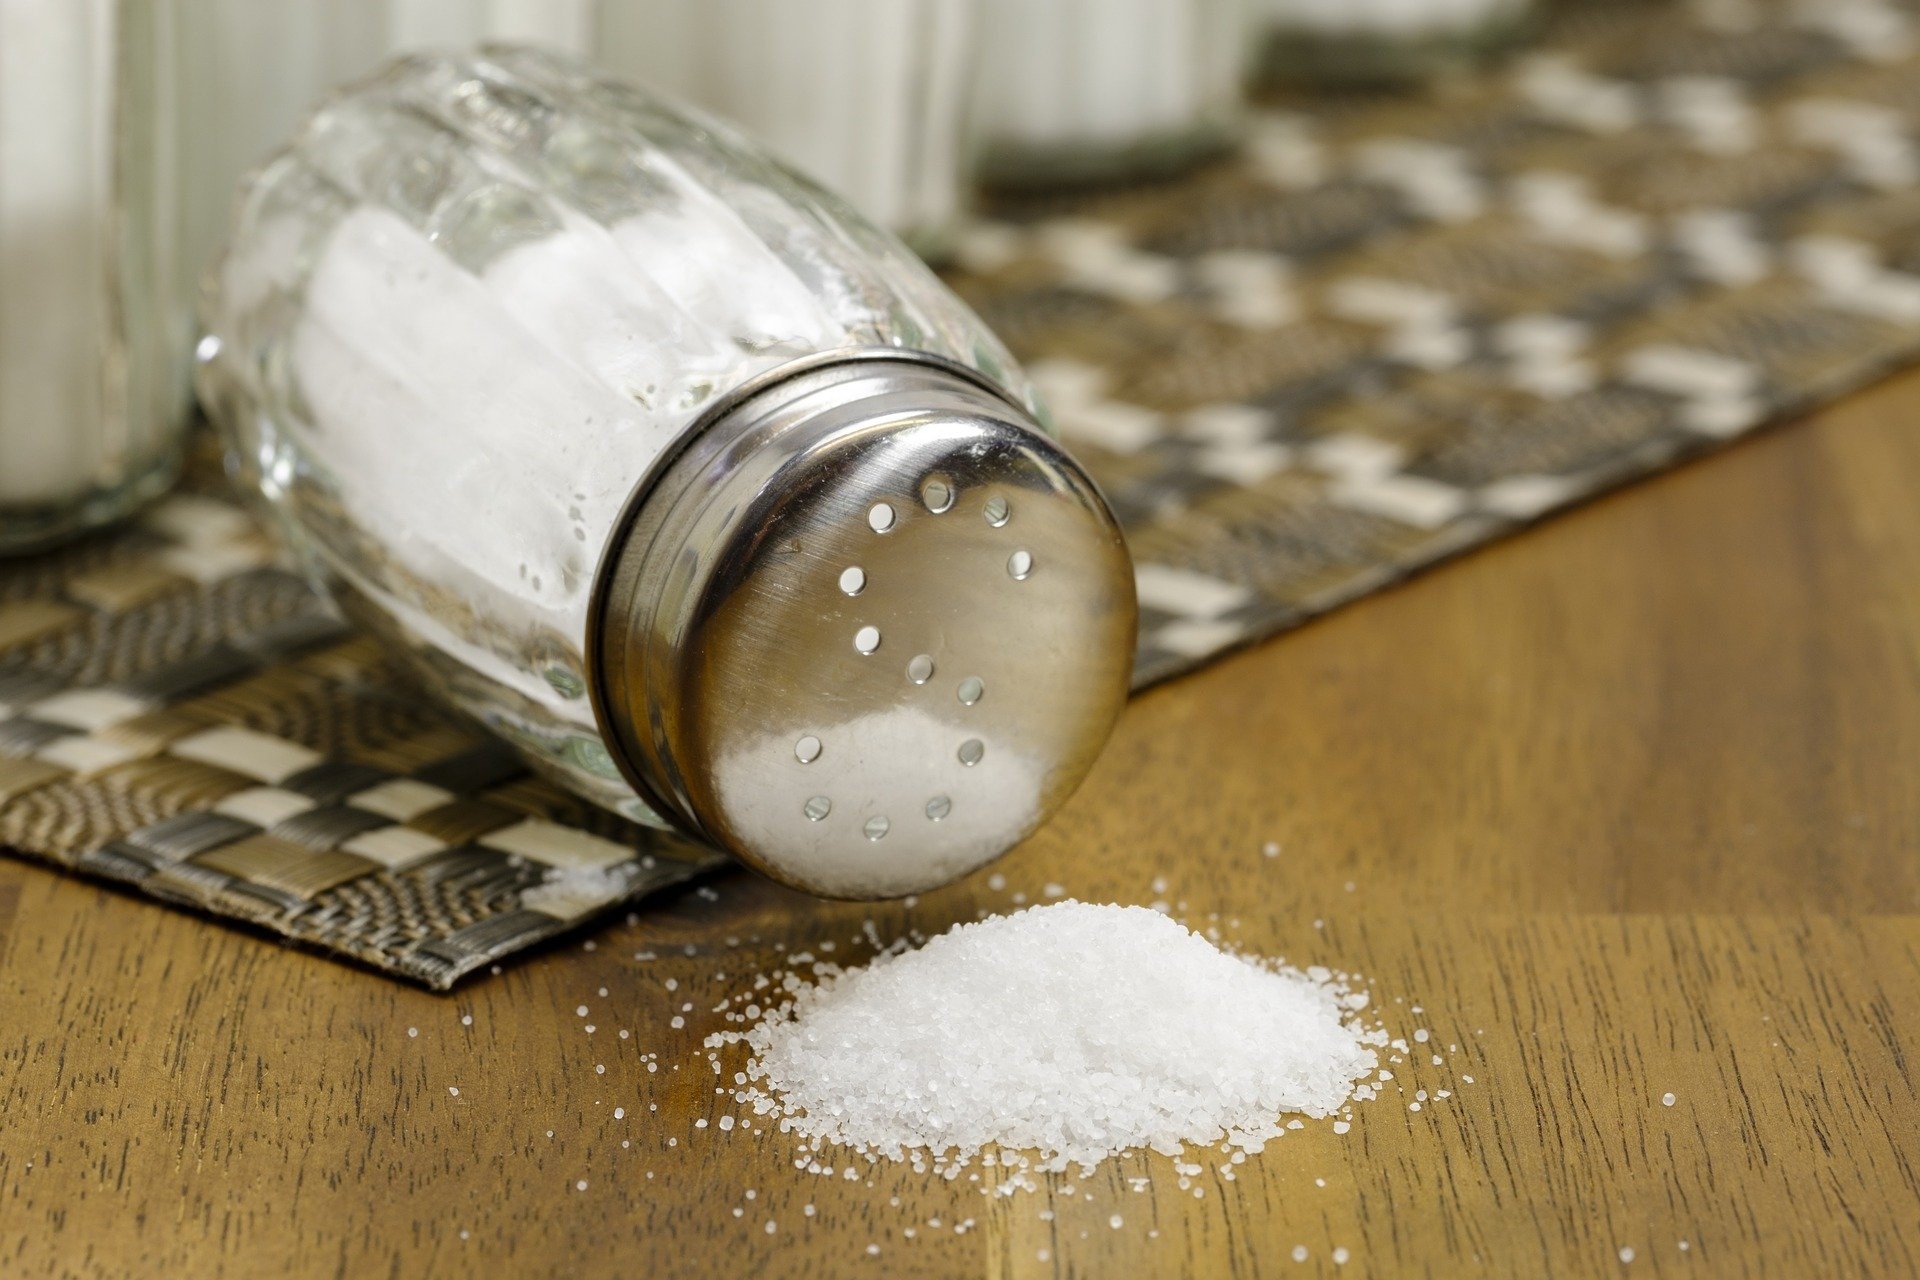 Salt substitution can lower blood pressure in hypertensive patients in rural India